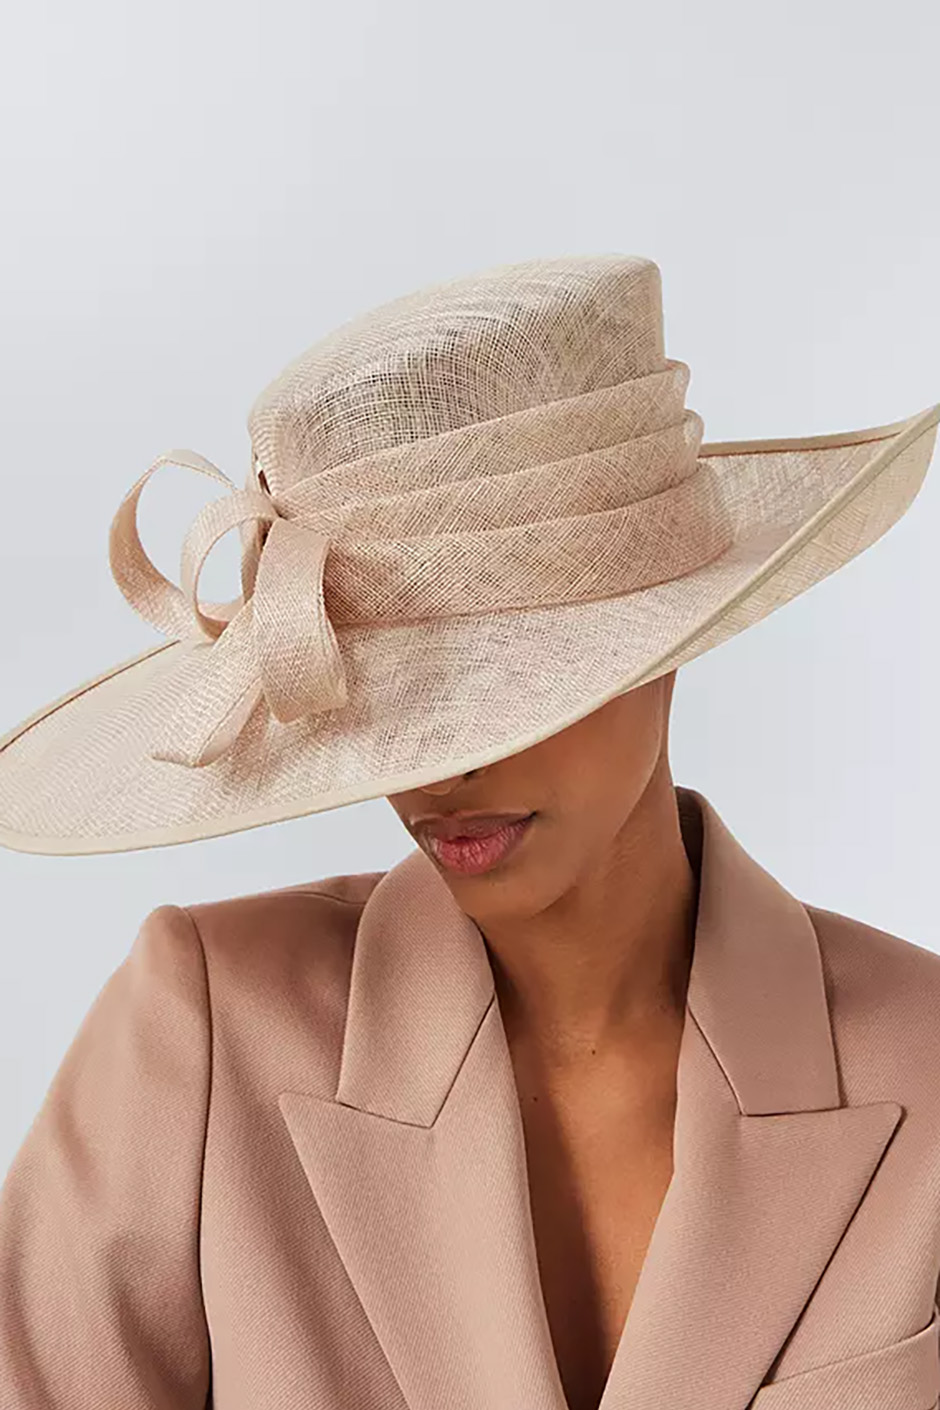 John Lewis wedding hat in natural pearl colour with decorative bow on the front